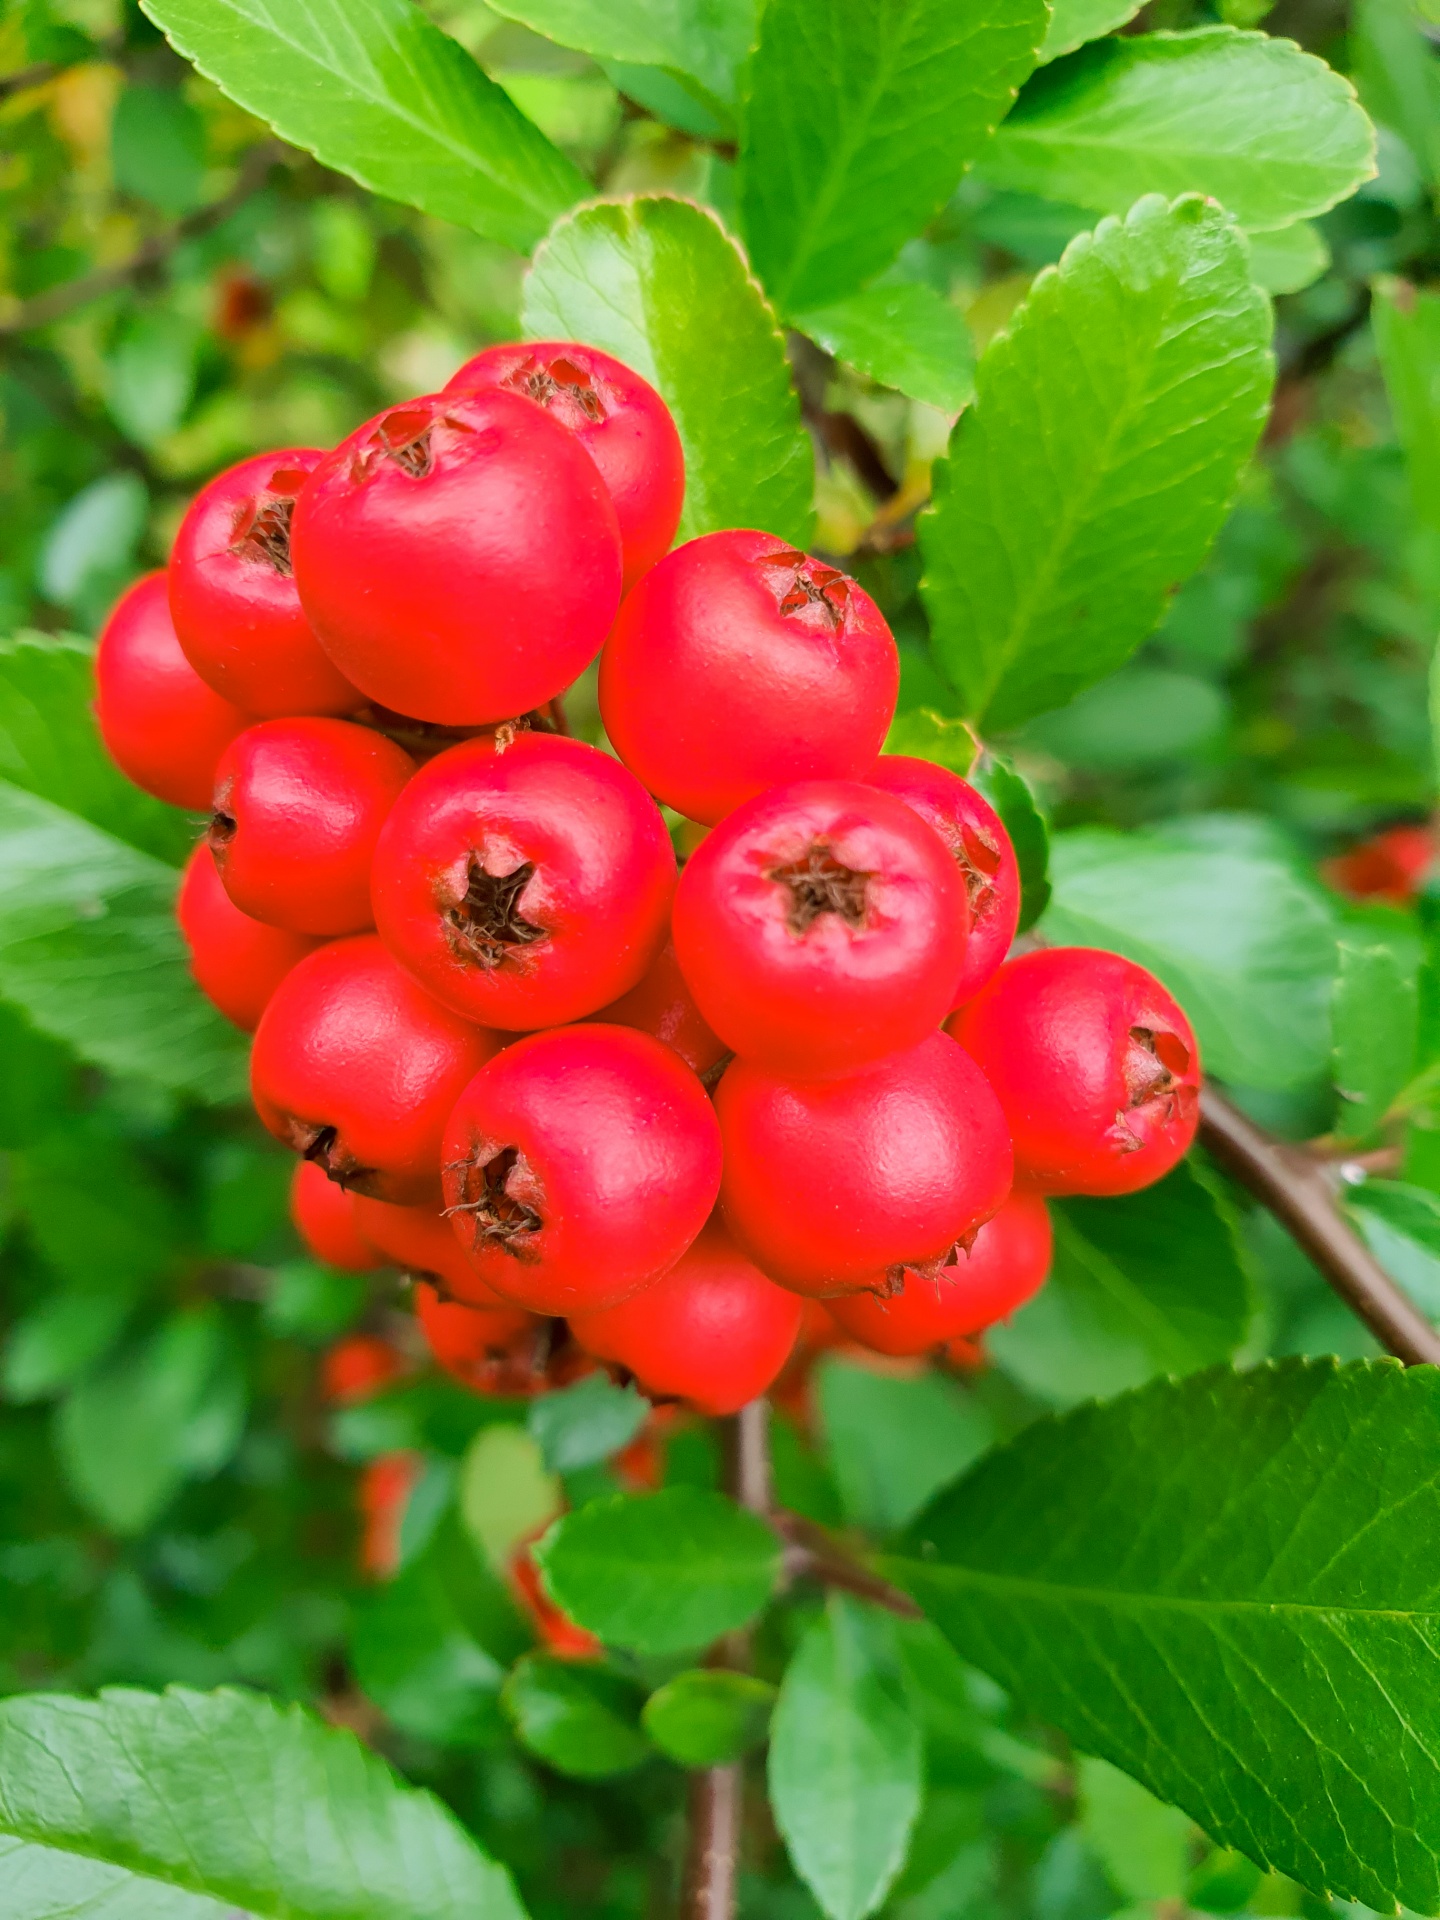 Red firethorns berries with green leaves